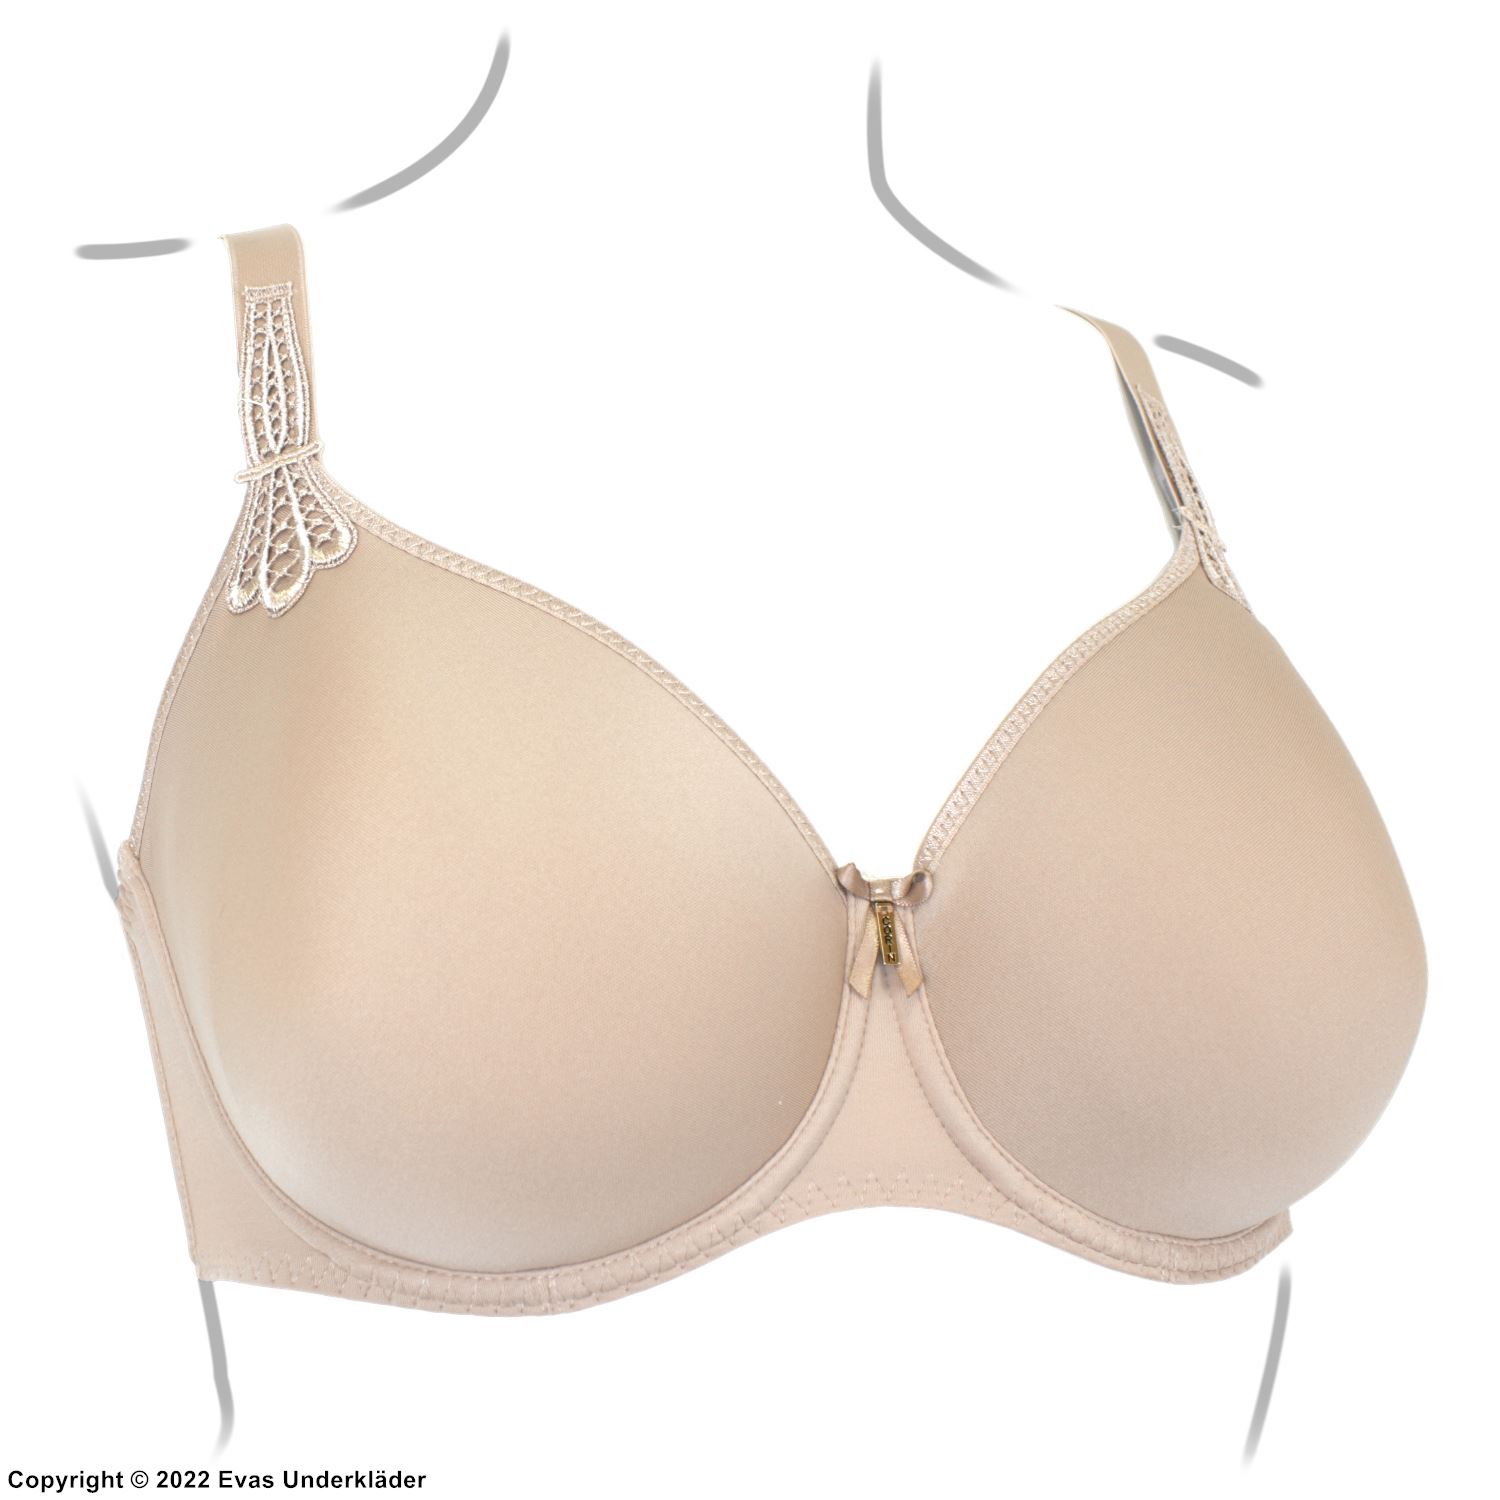 Spacer bra, invisible under clothes, B to J-cup